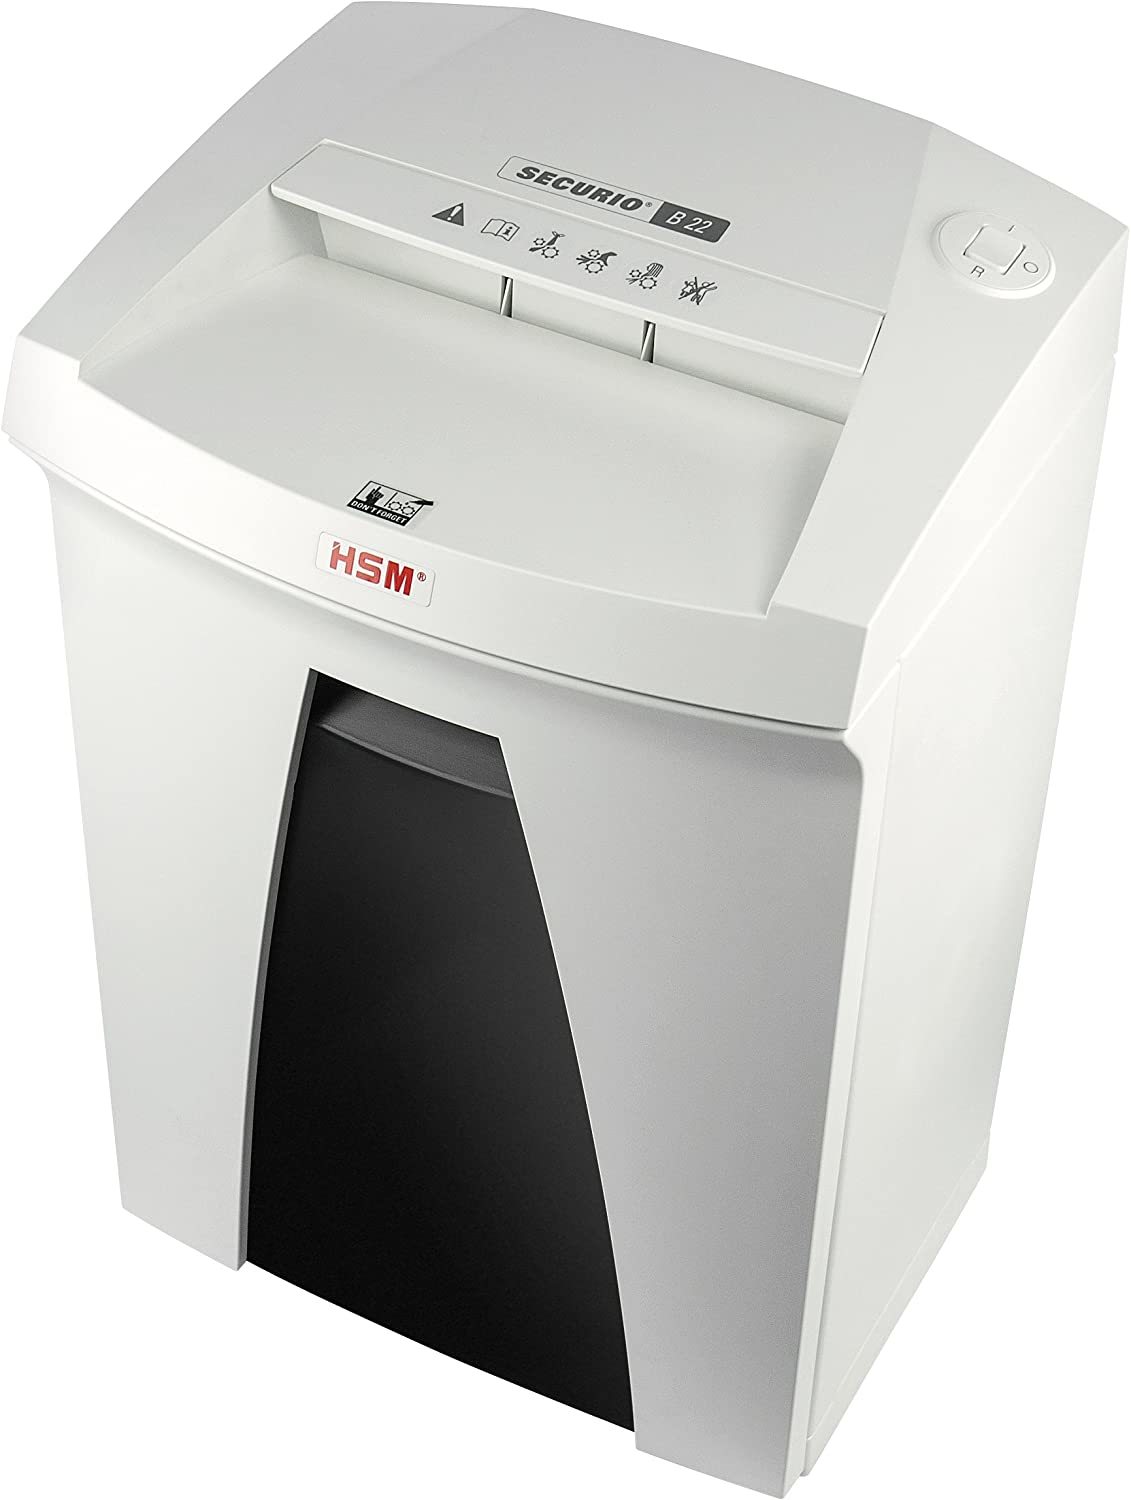 Primary image for Hsm Securio B22S, 22–24 Sheet, Strip–Cut, 8–7 Gallon Capacity Continuous